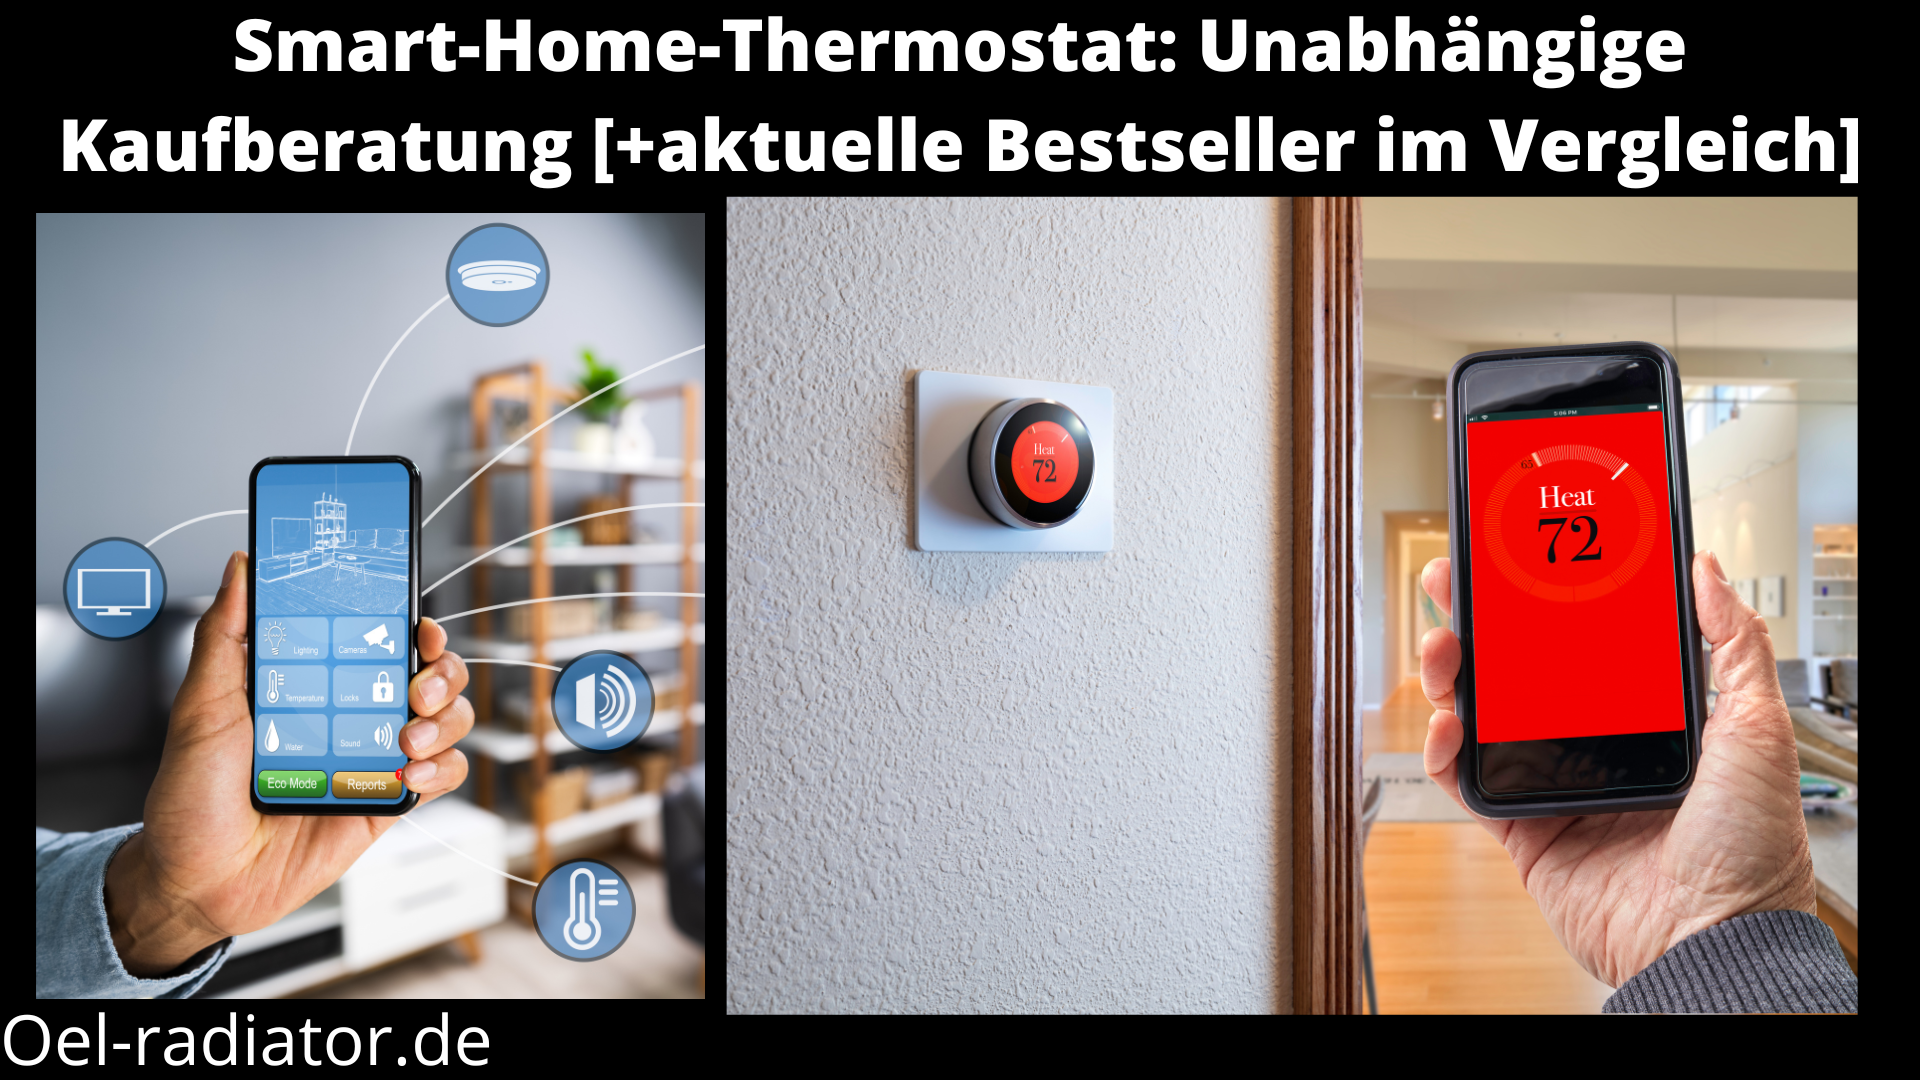 Smart-Home-Thermostat Test